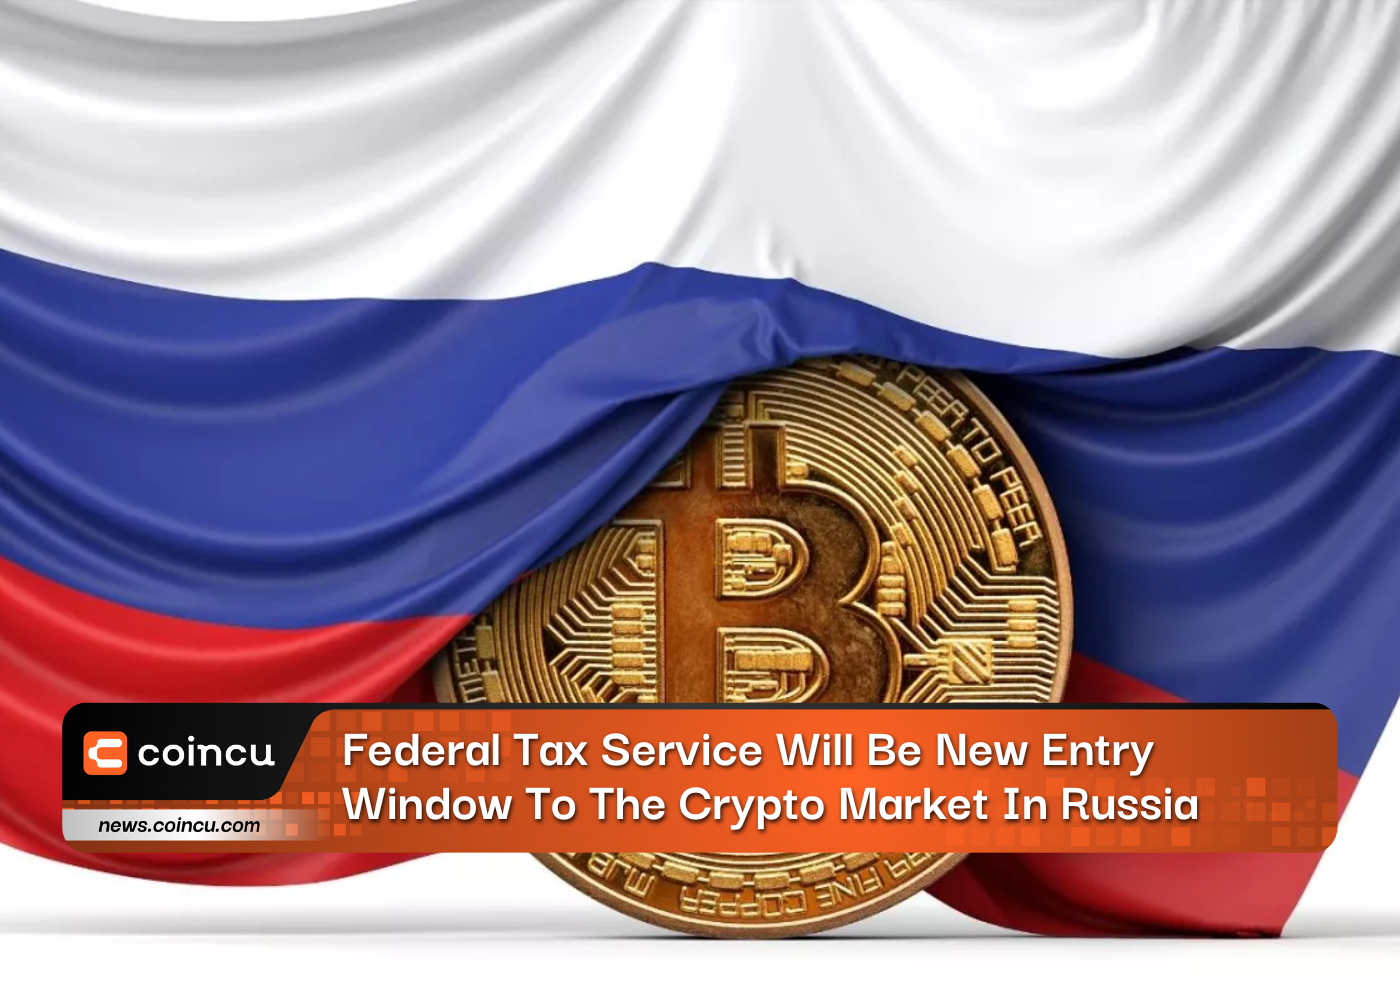 Federal Tax Service Will Be New Entry Window To The Crypto Market In Russia